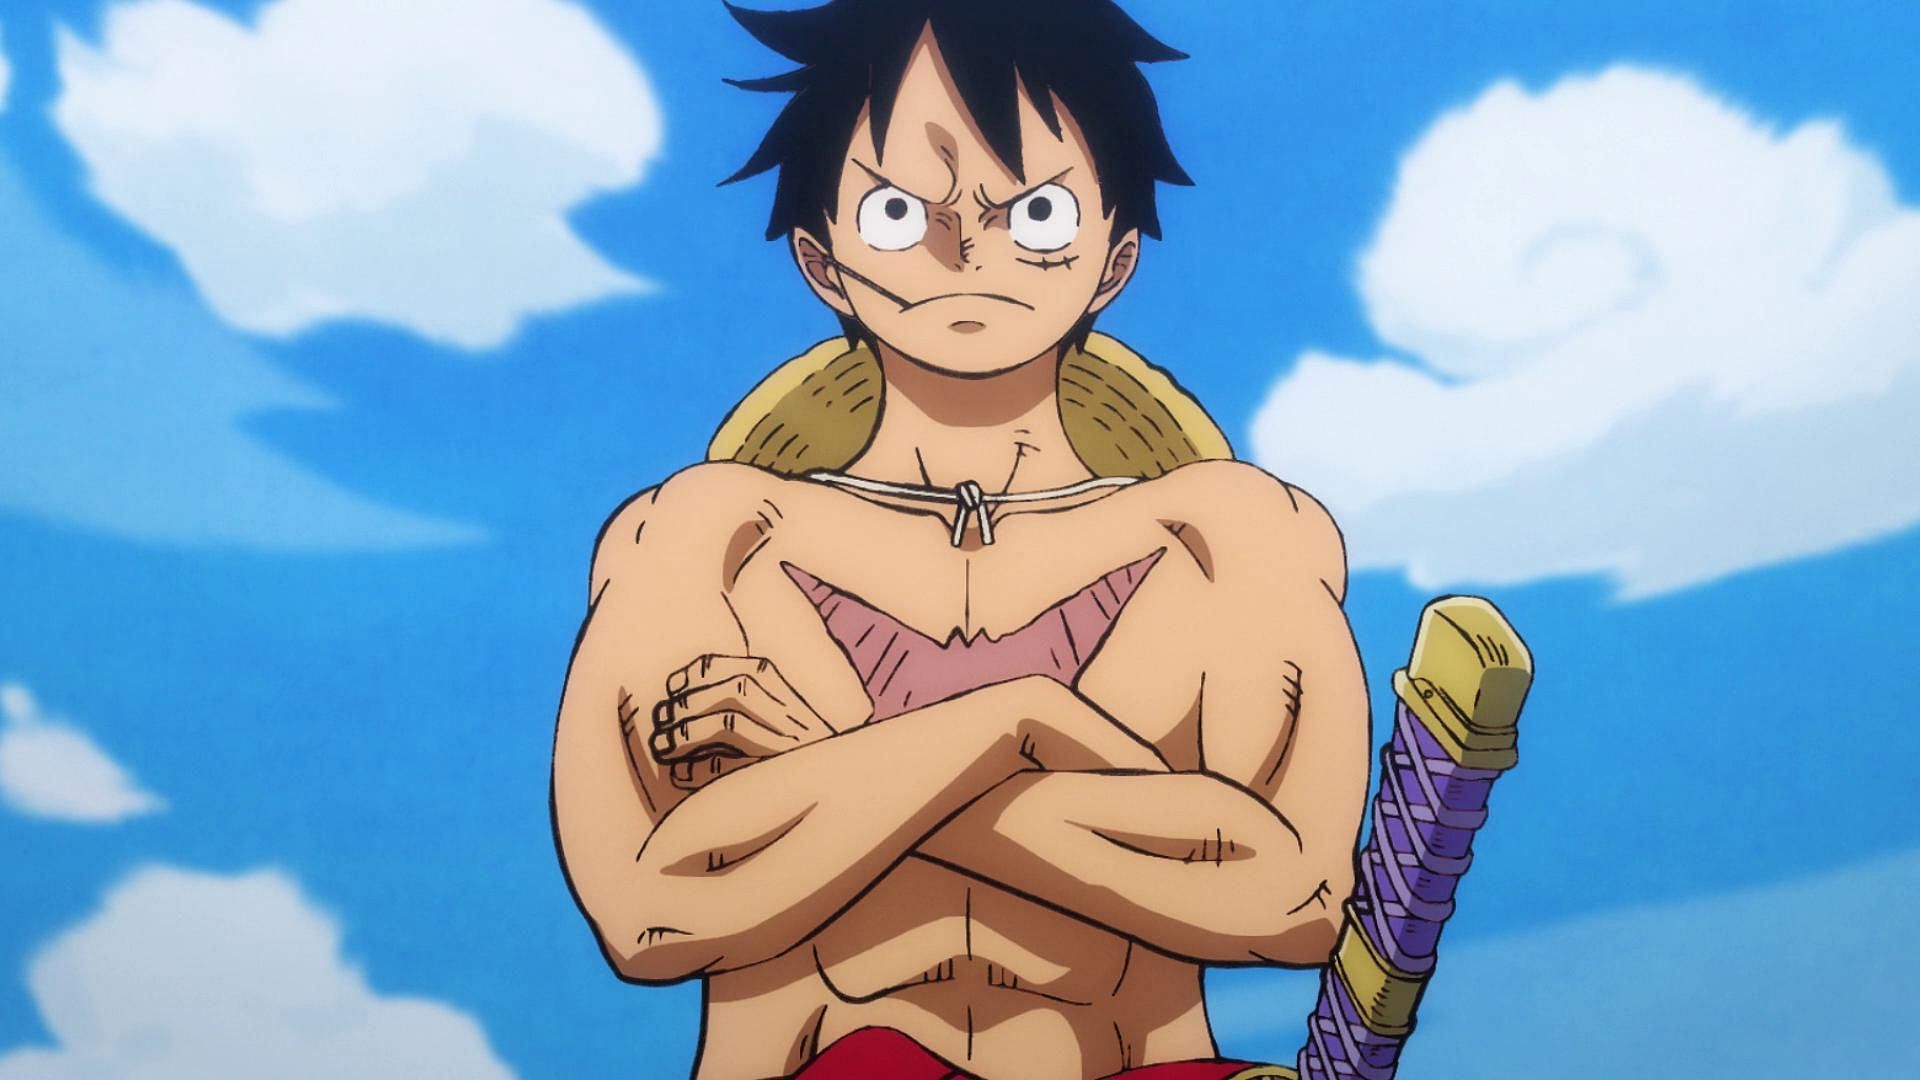 Luffy as seen in the anime&#039;s Wano arc (Image via Toei Animation)